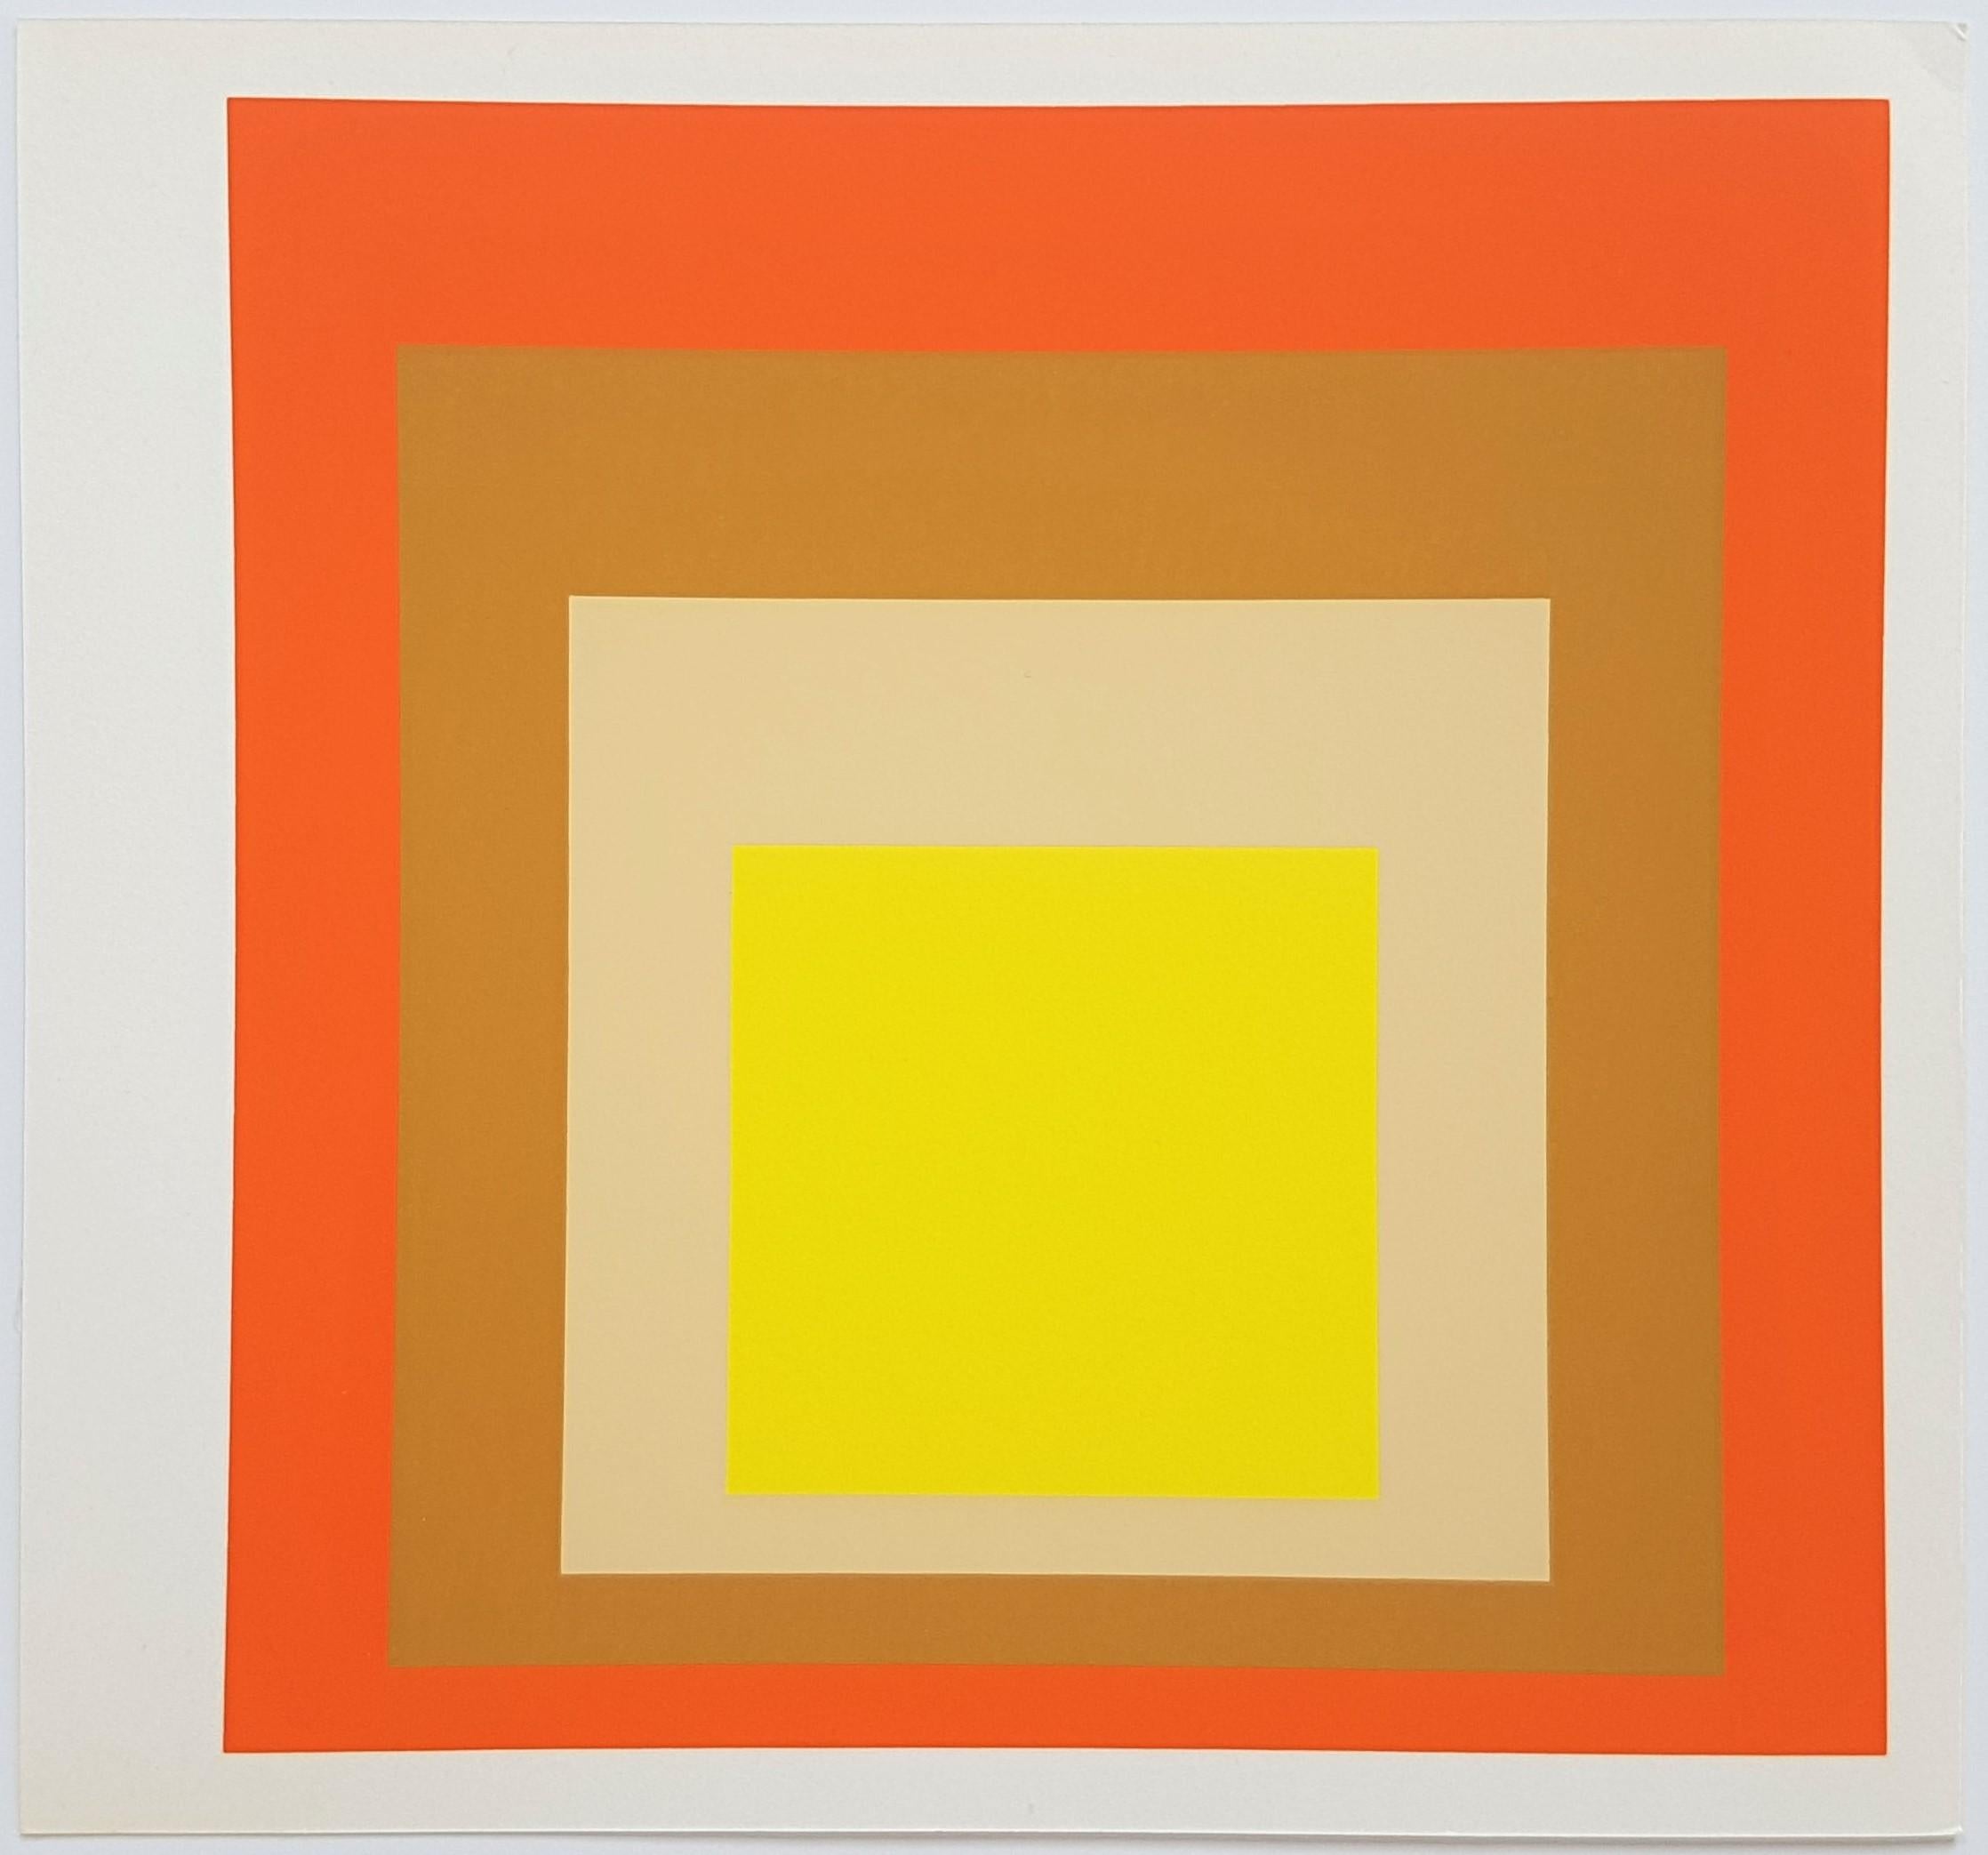 (after) Josef Albers Abstract Print - Homage to the Square: Yes Sir (~35% OFF LIST PRICE - LIMITED TIME ONLY)